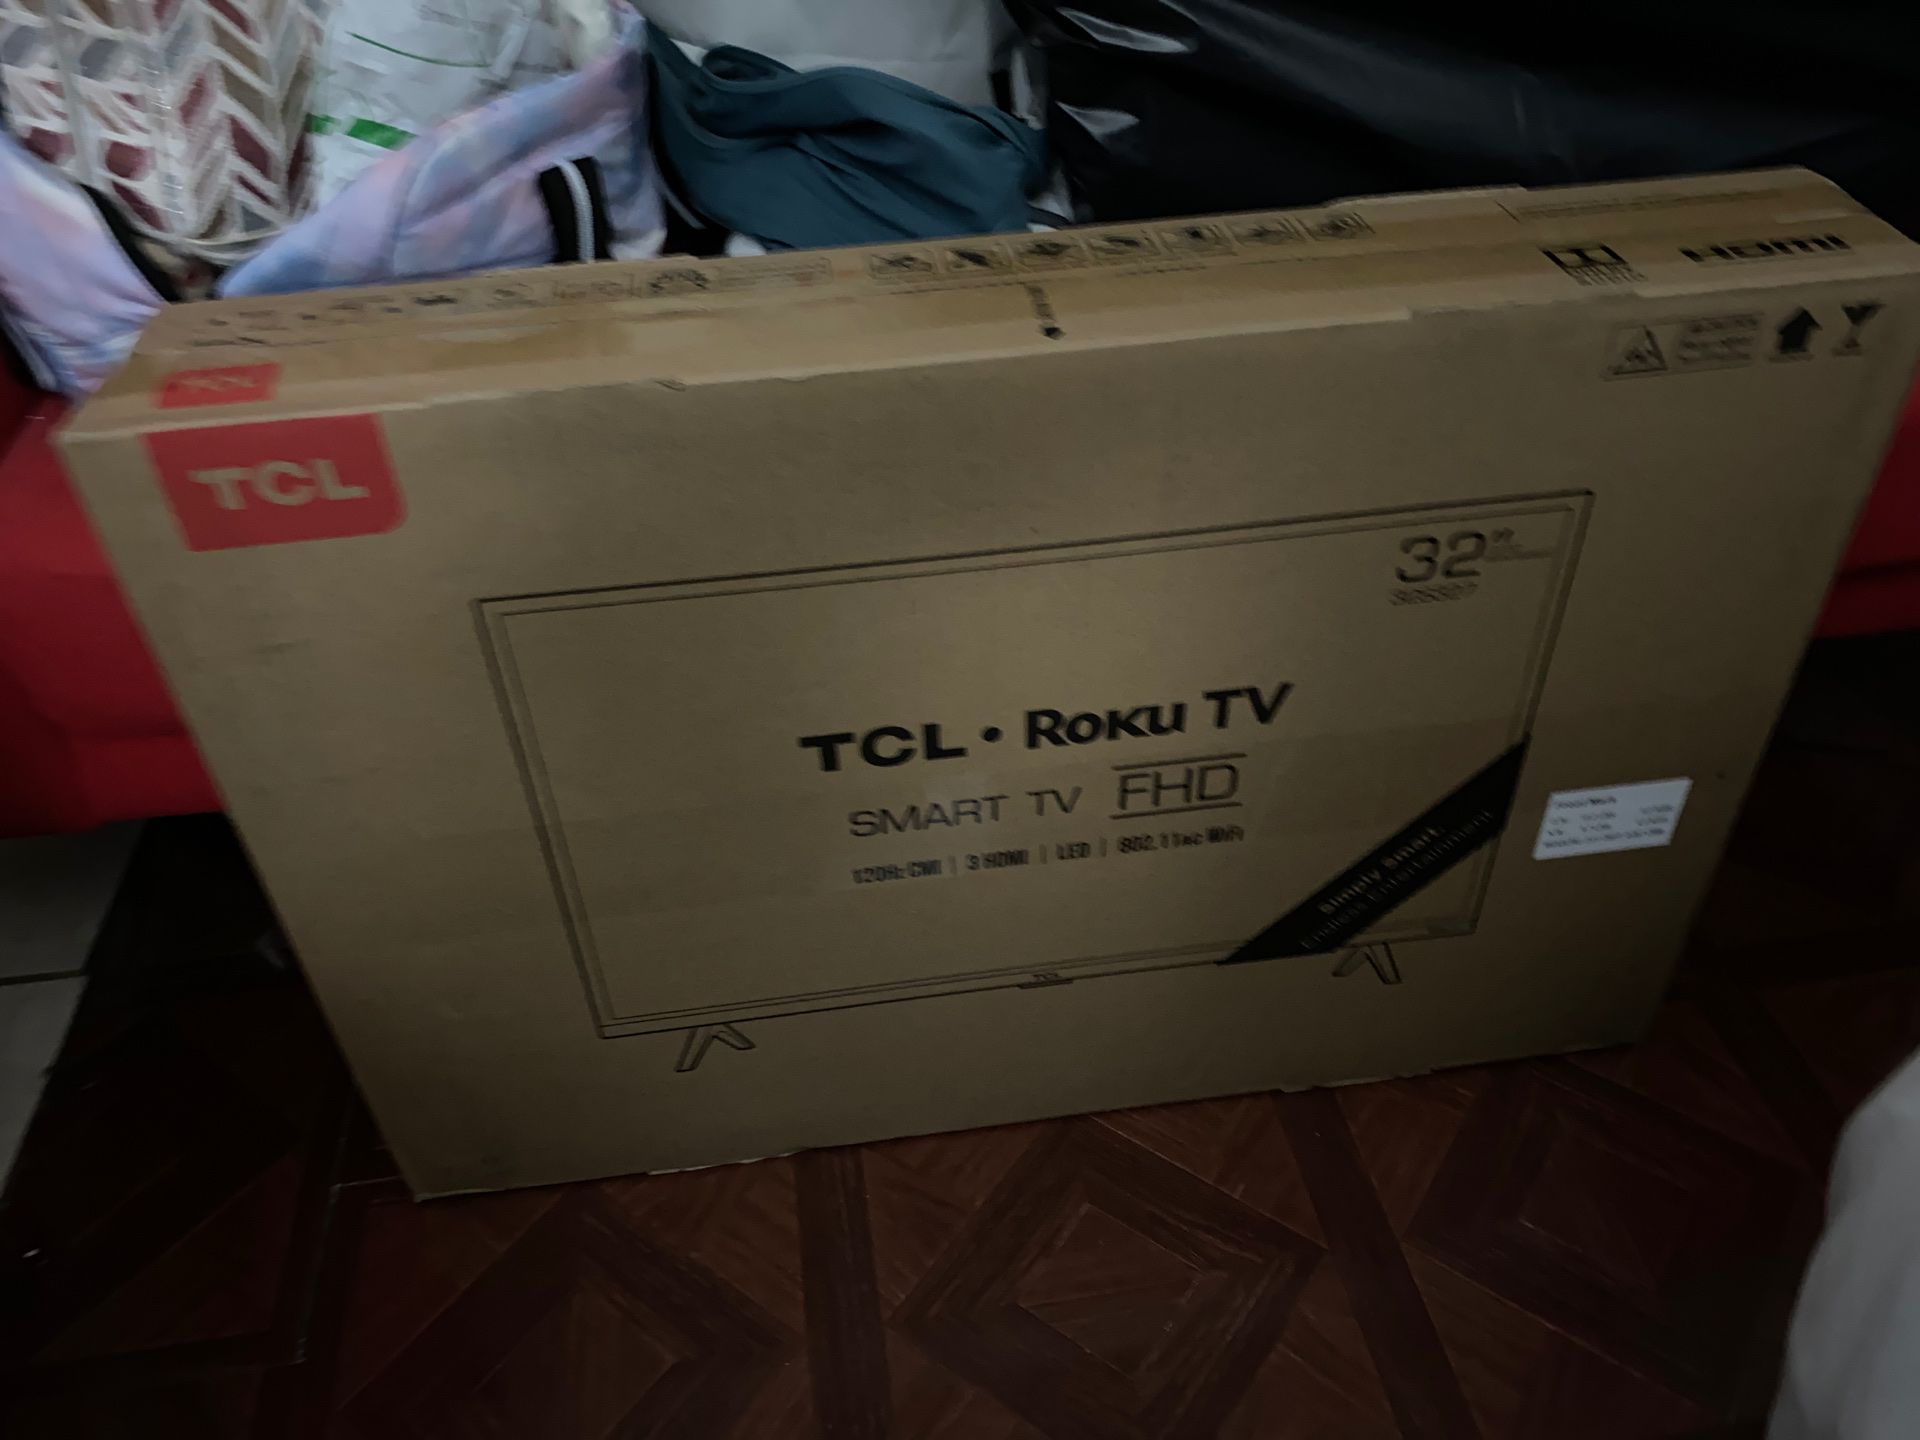 Tcl 32 inch tv